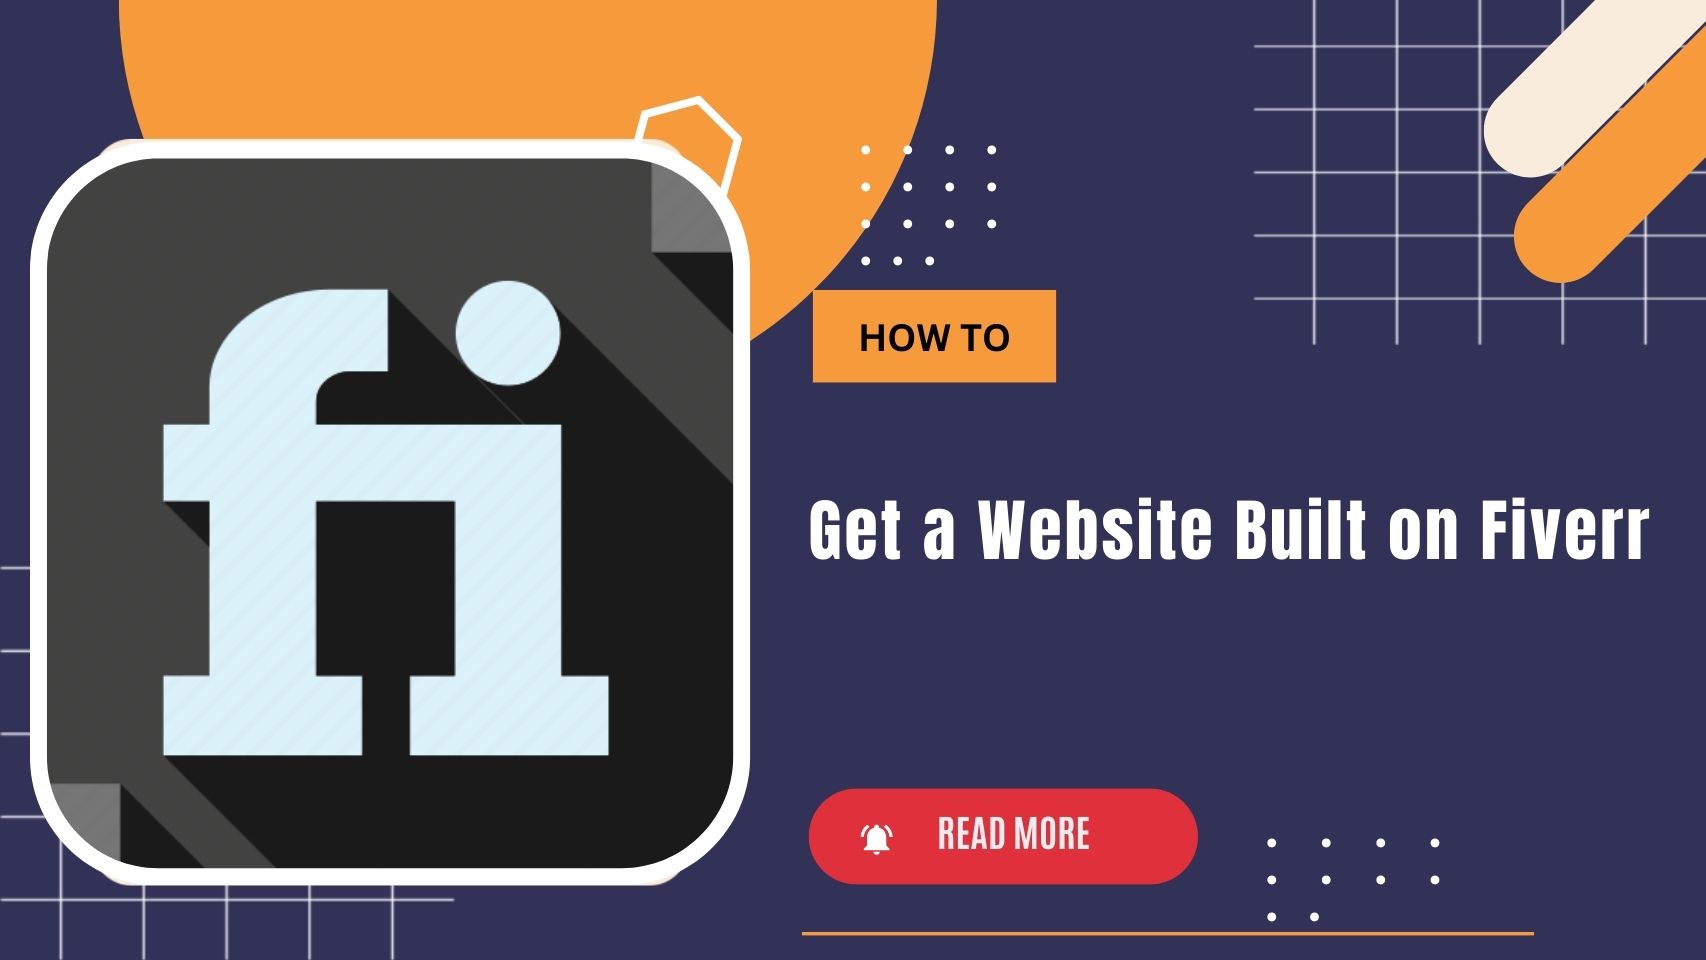 How to Get a Website Built on Fiverr